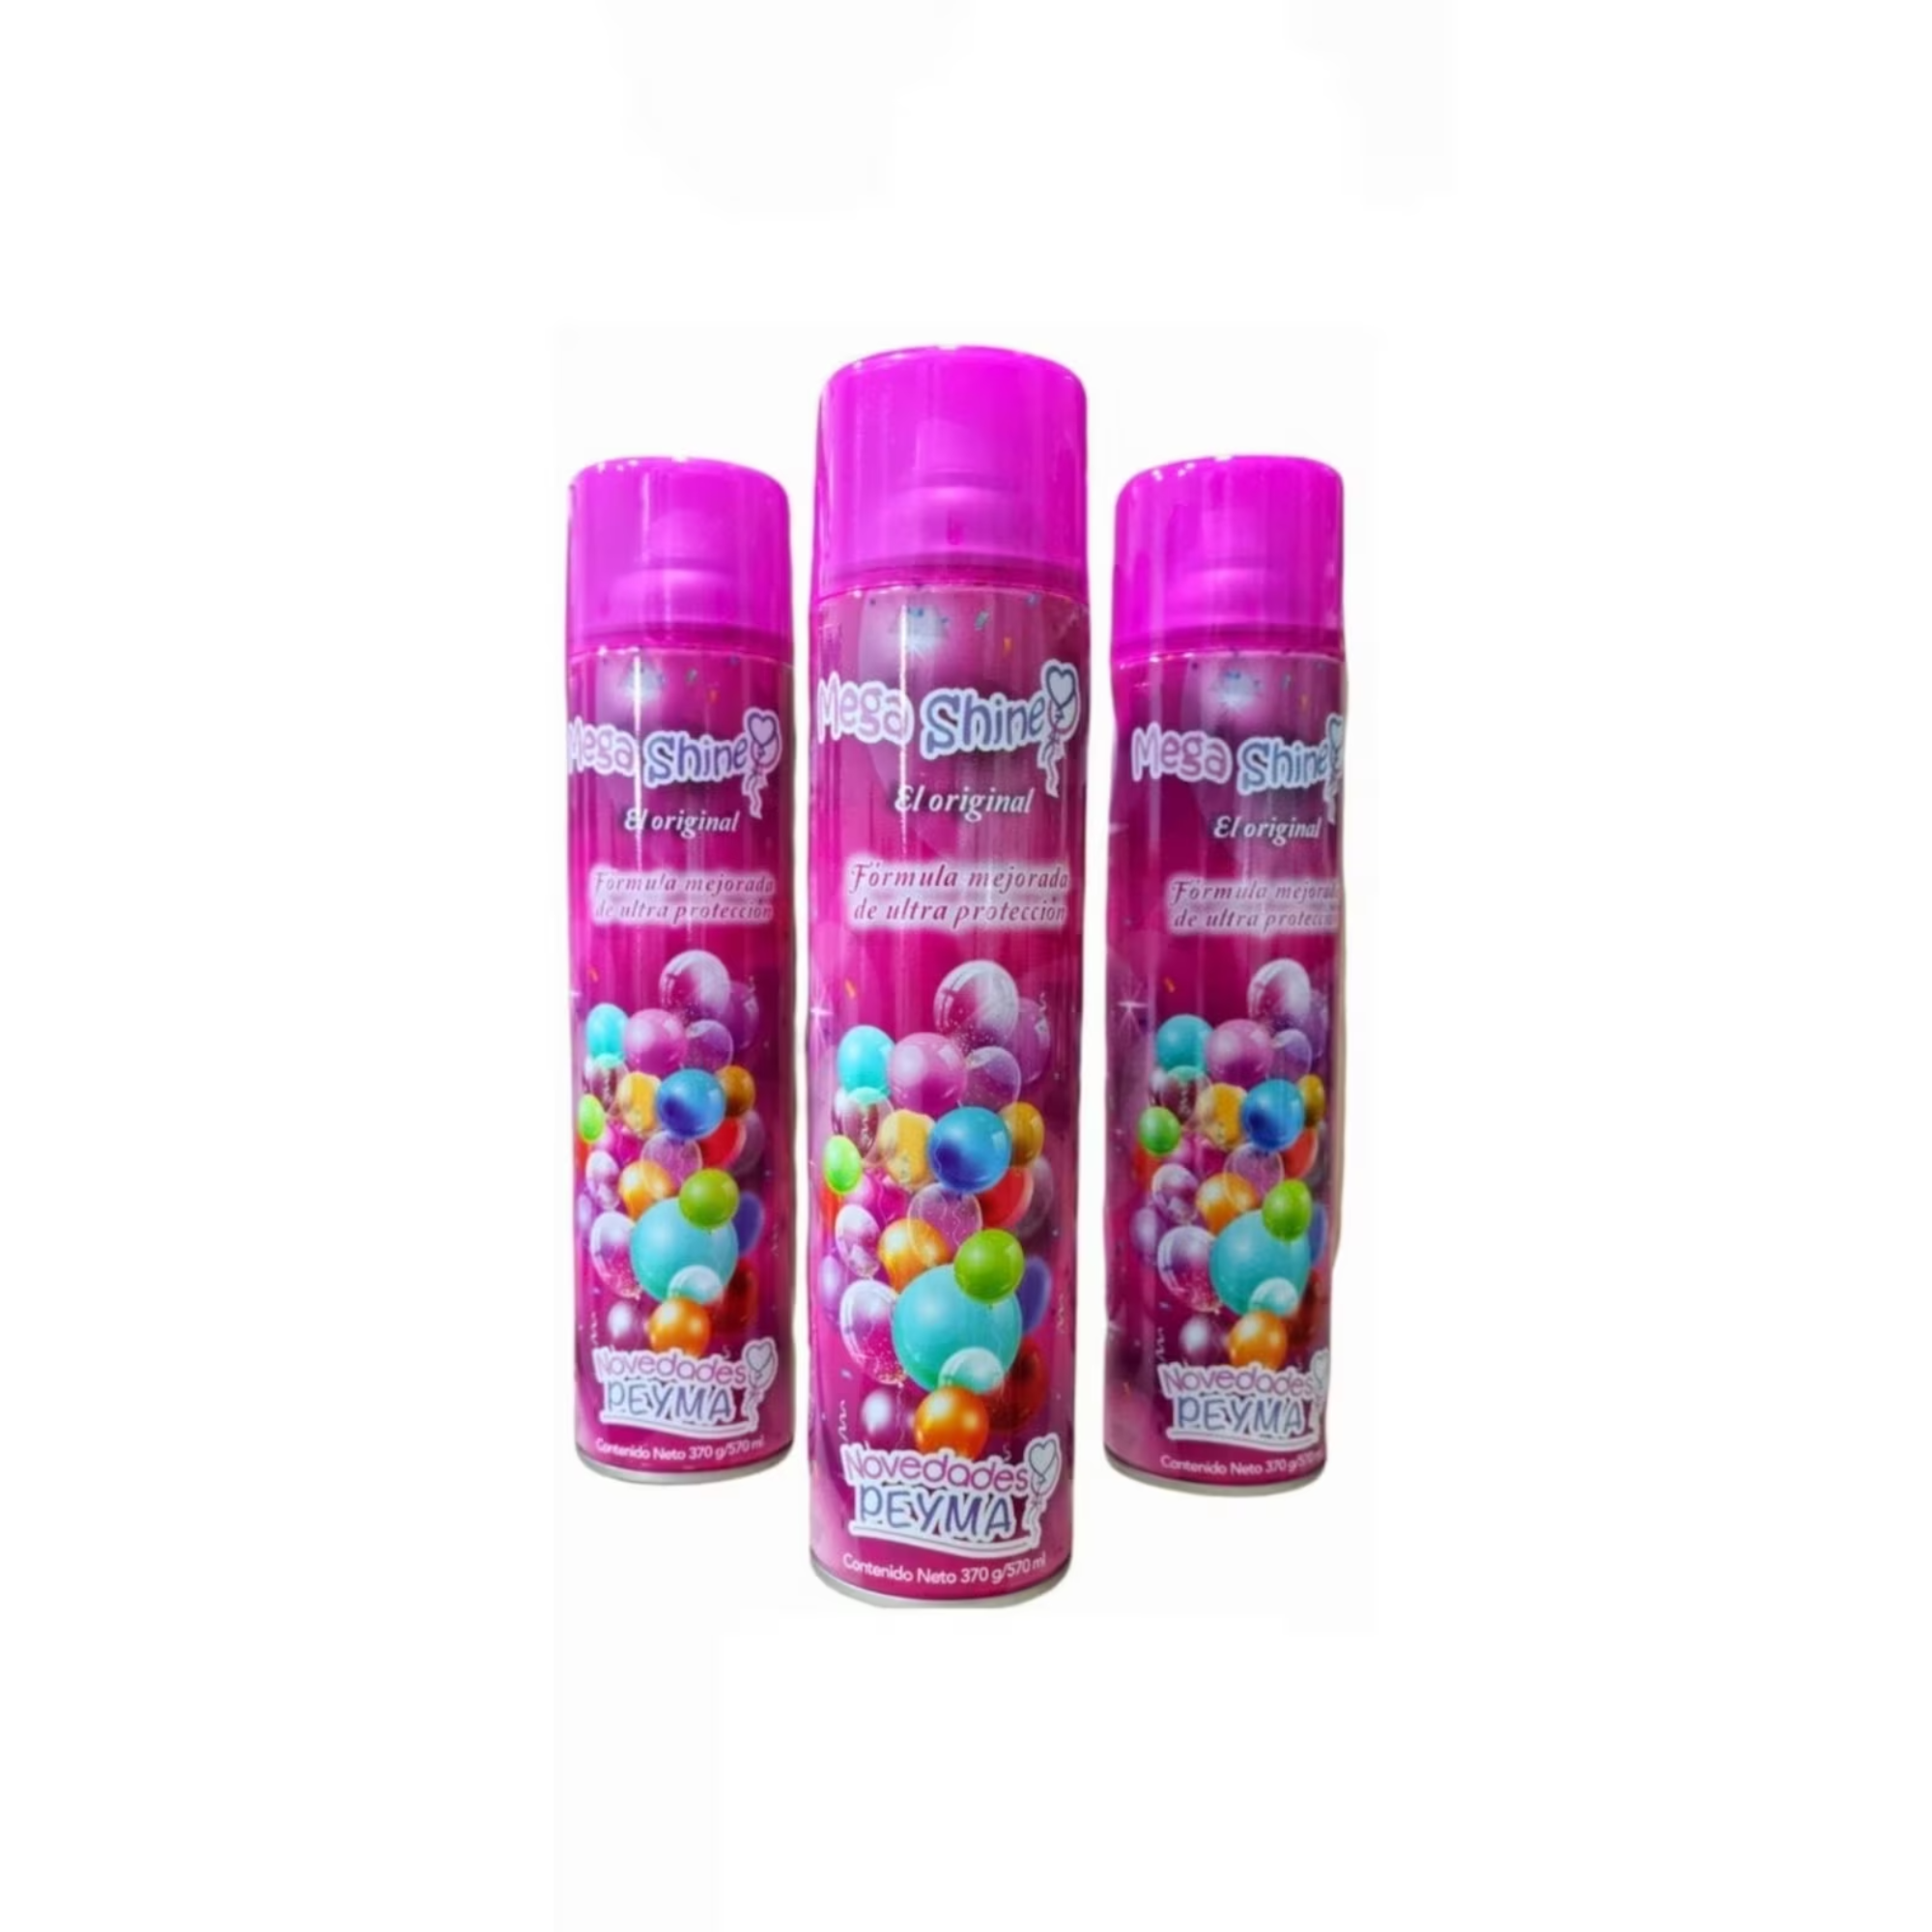 We sell MEGASHINE! @megashine_novedadespeyma Make your balloons shinier  with just an easy spray on product. Only two steps, 1.Blow…